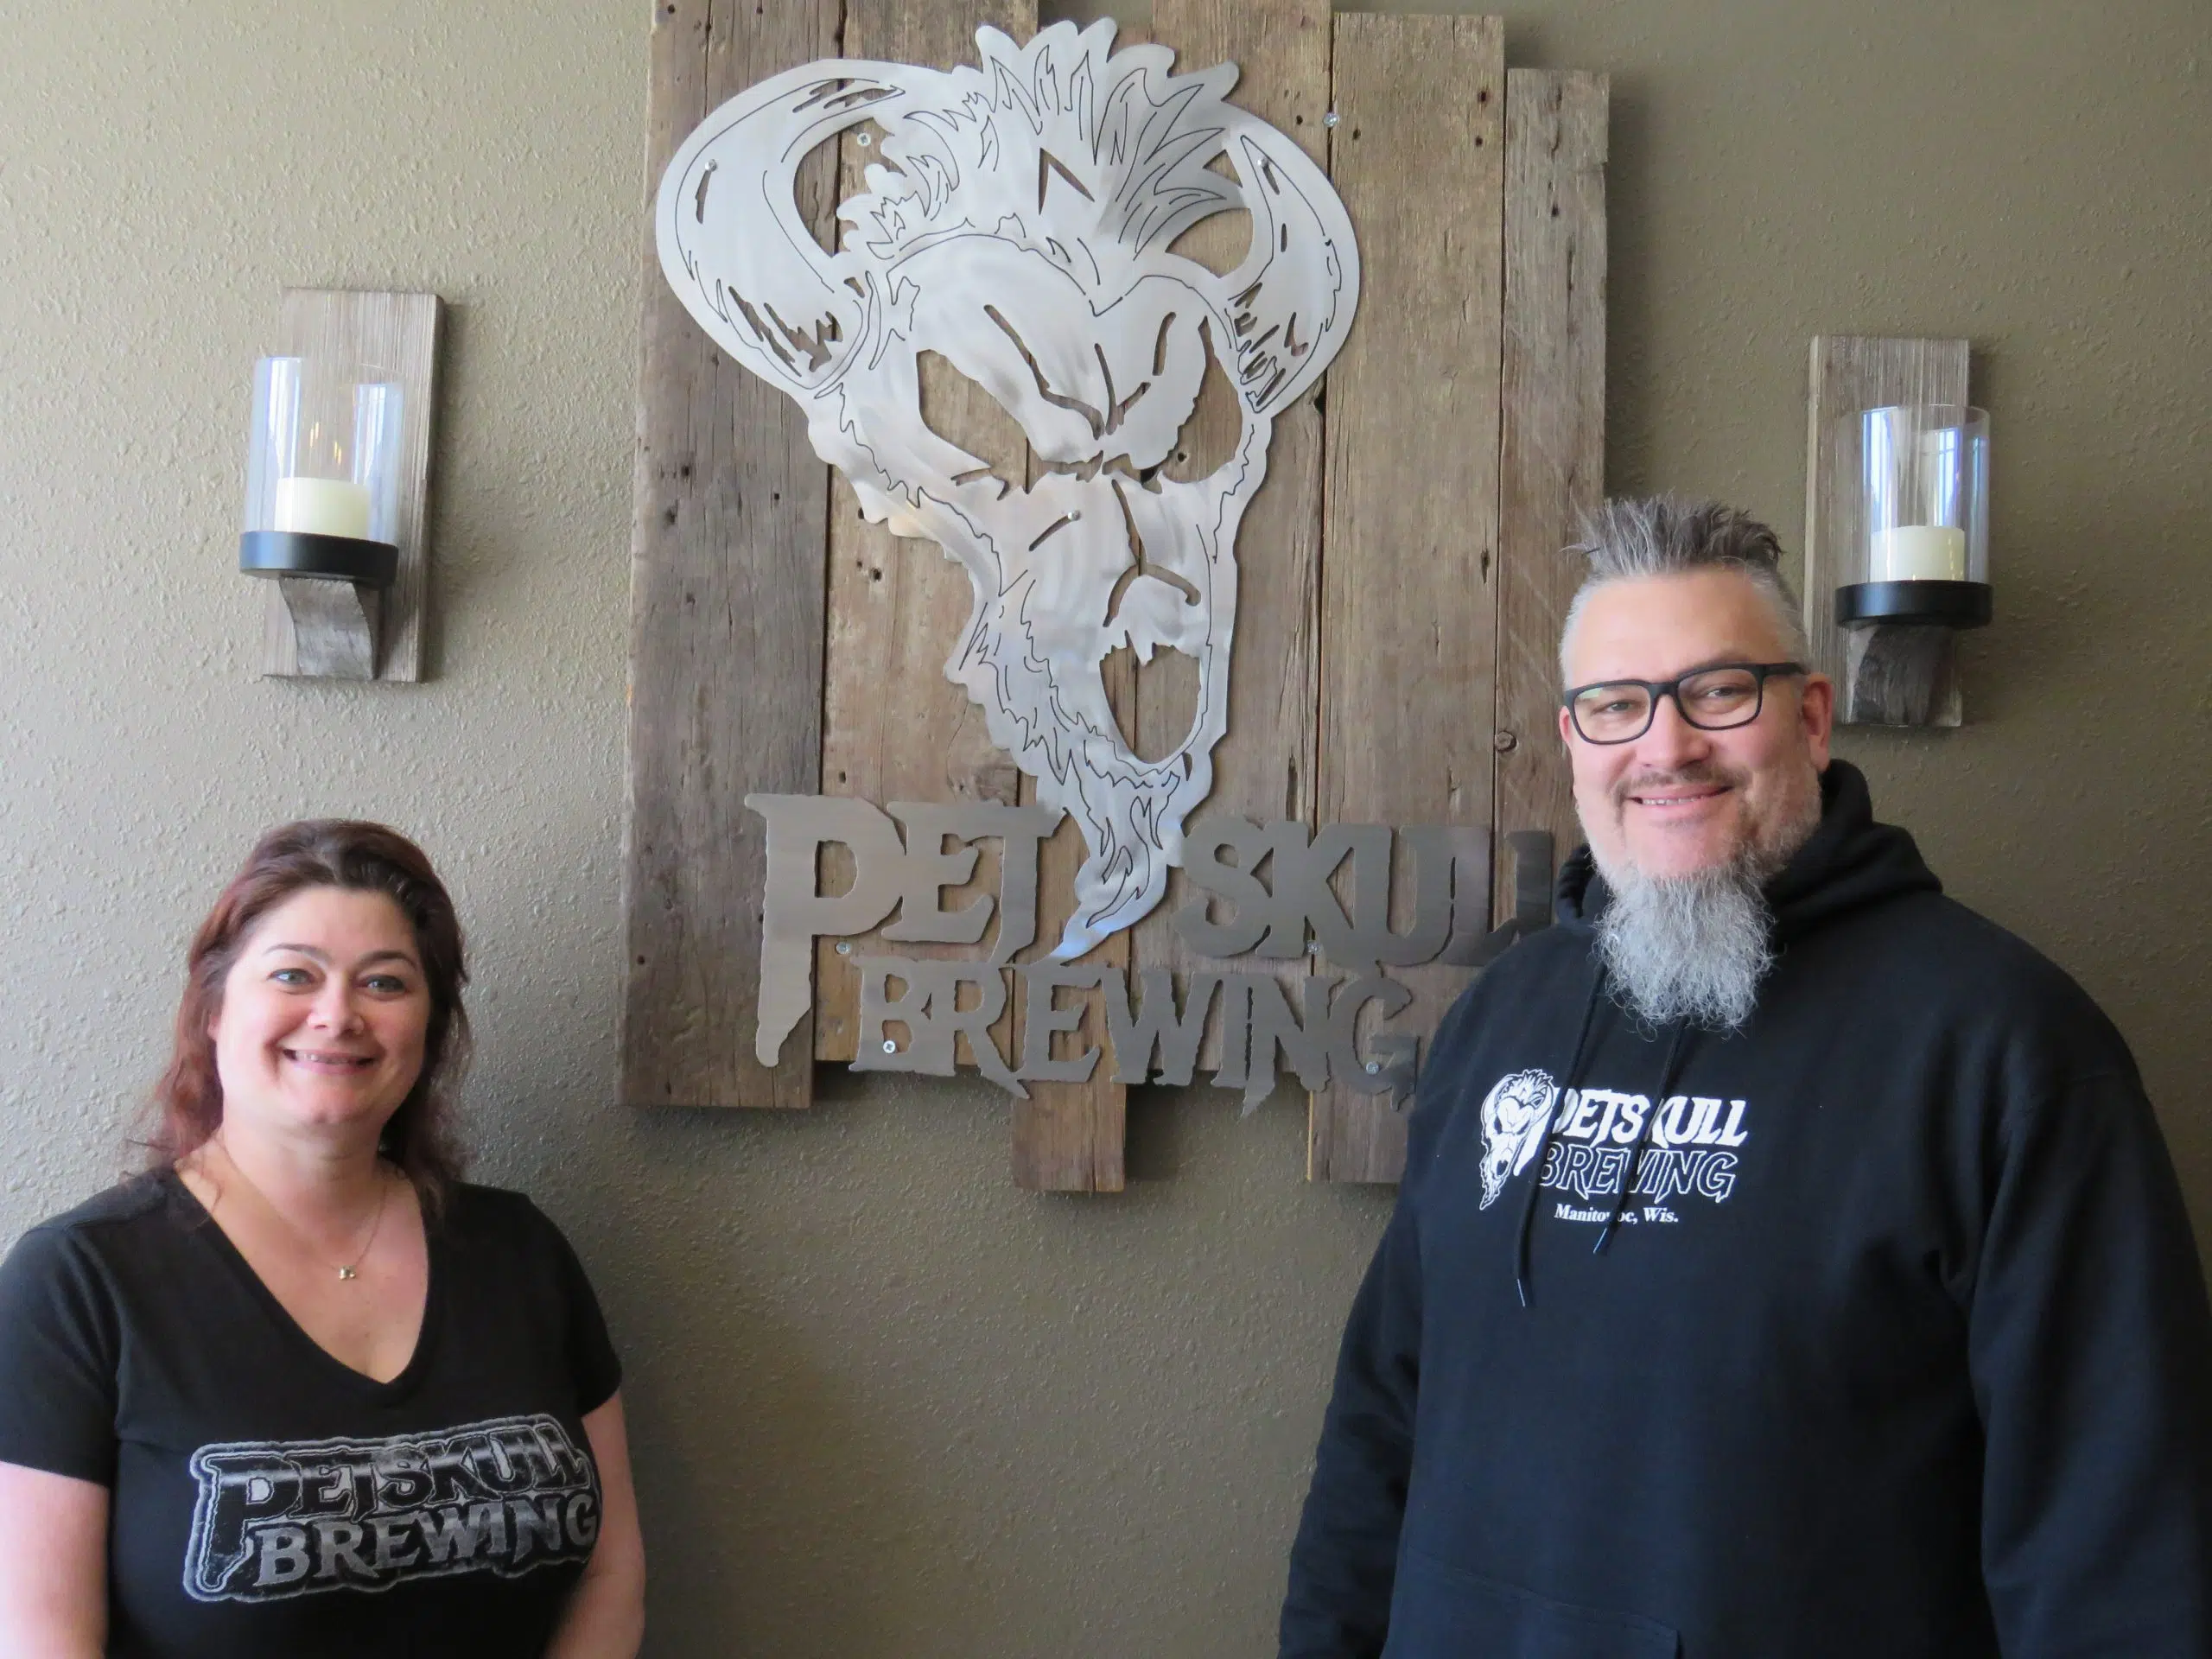 Petskull Brewery Owner Excited to Expand